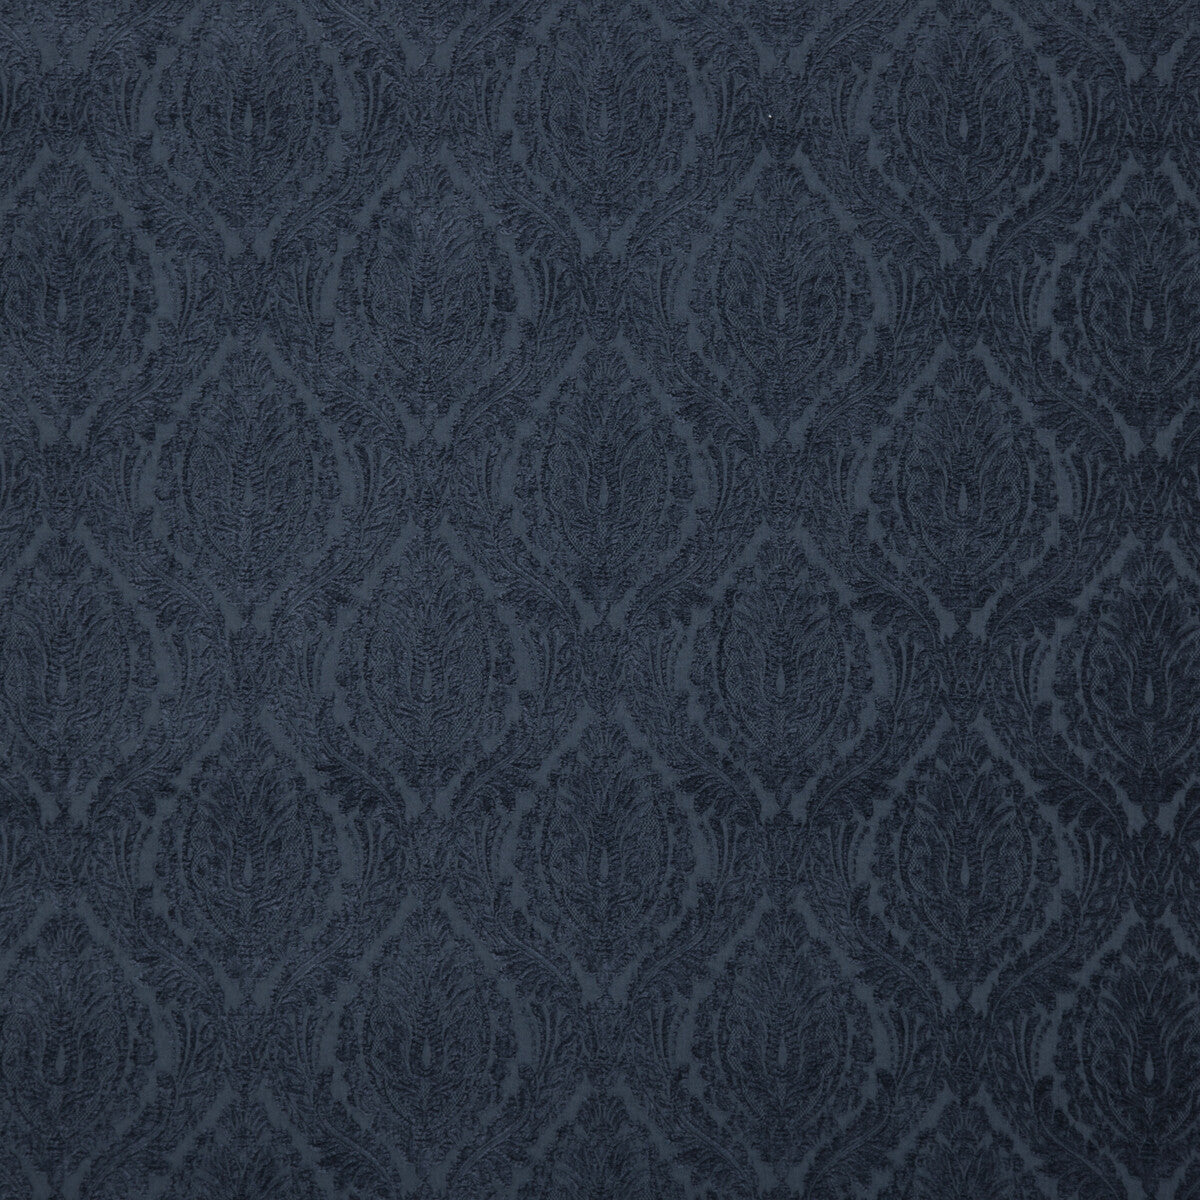 Pentire fabric in indigo color - pattern BF10569.680.0 - by G P &amp; J Baker in the Artisan collection